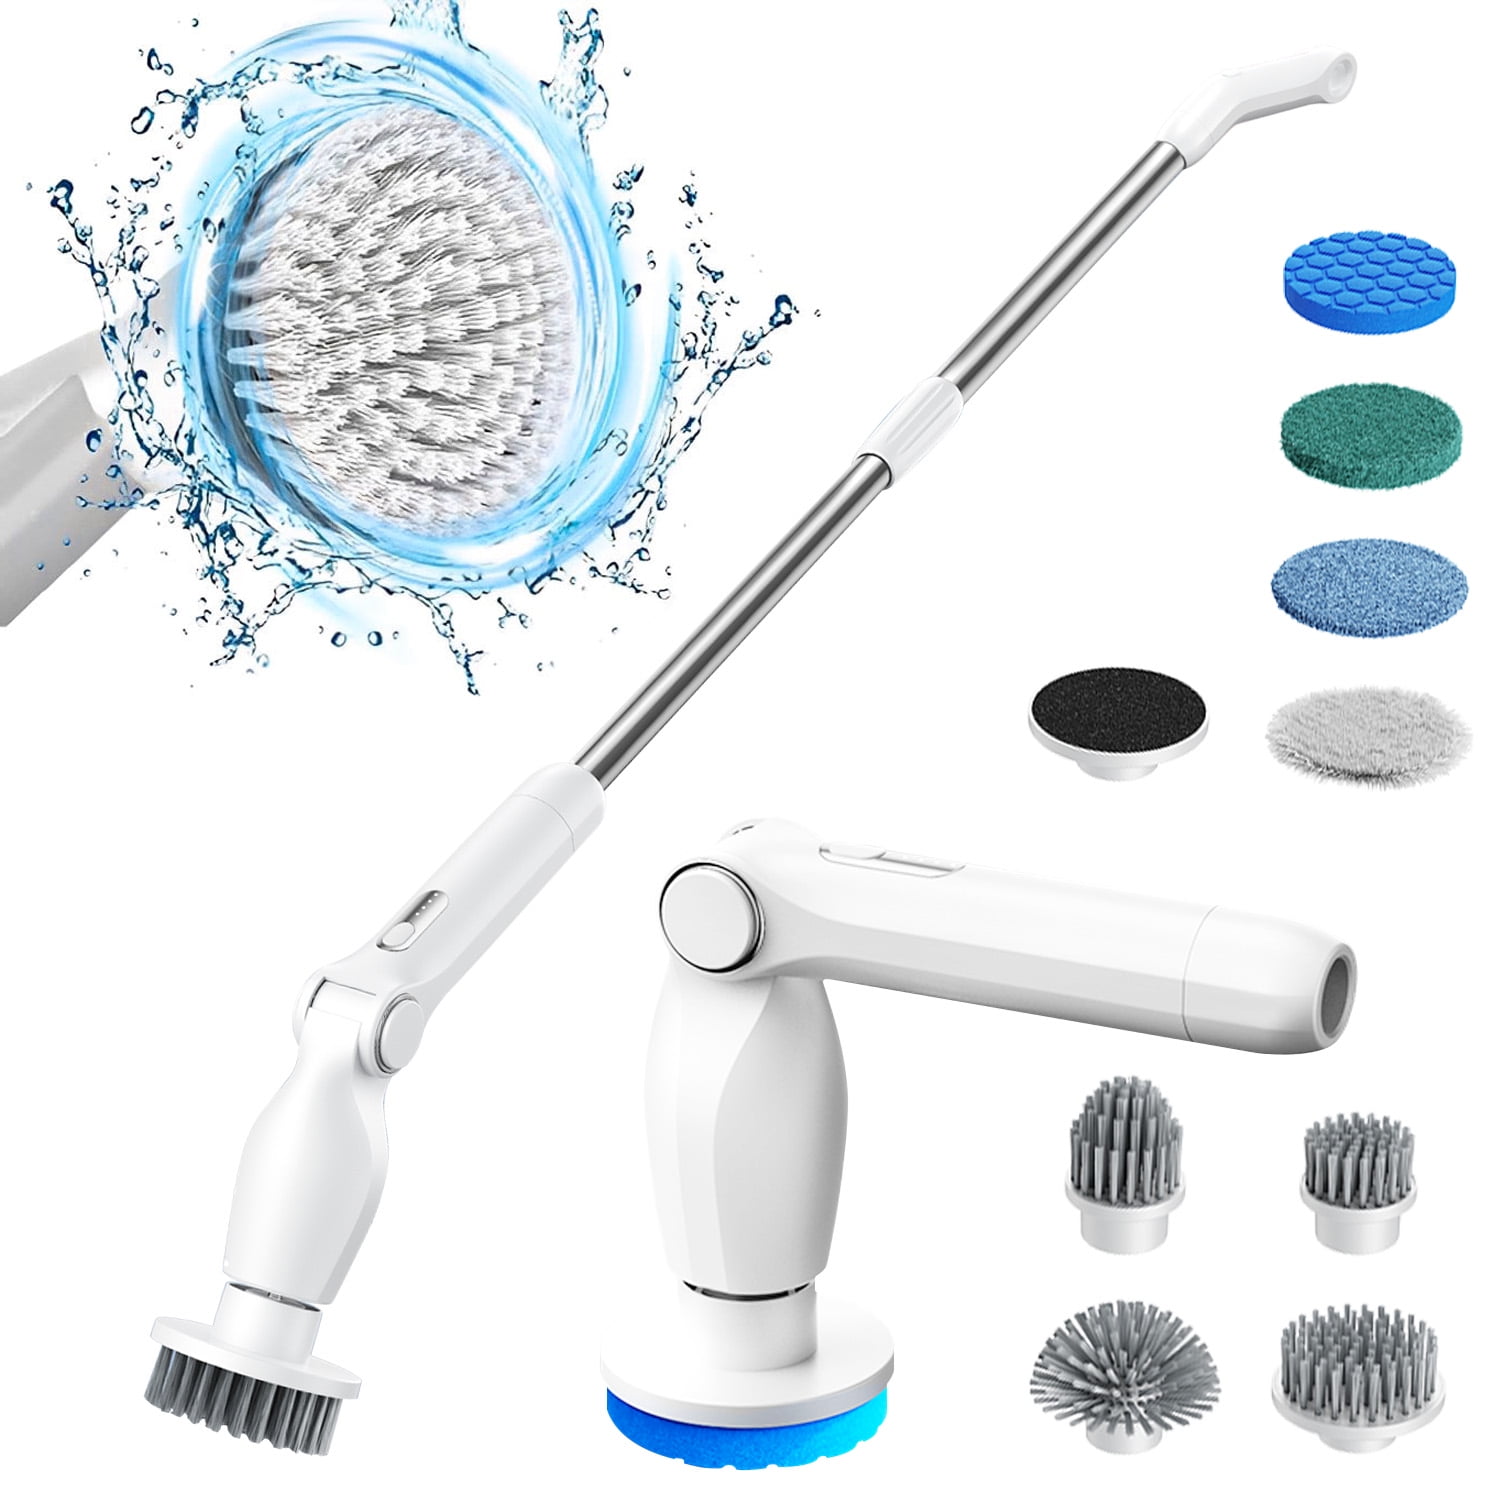 GOTUU Electric Spin Scrubber, Cordless Power Brush Scrubber, Shower  Scrubber Cleaning Brush with Adjustable Foam Handle, 8 Replaceable Brushes  for